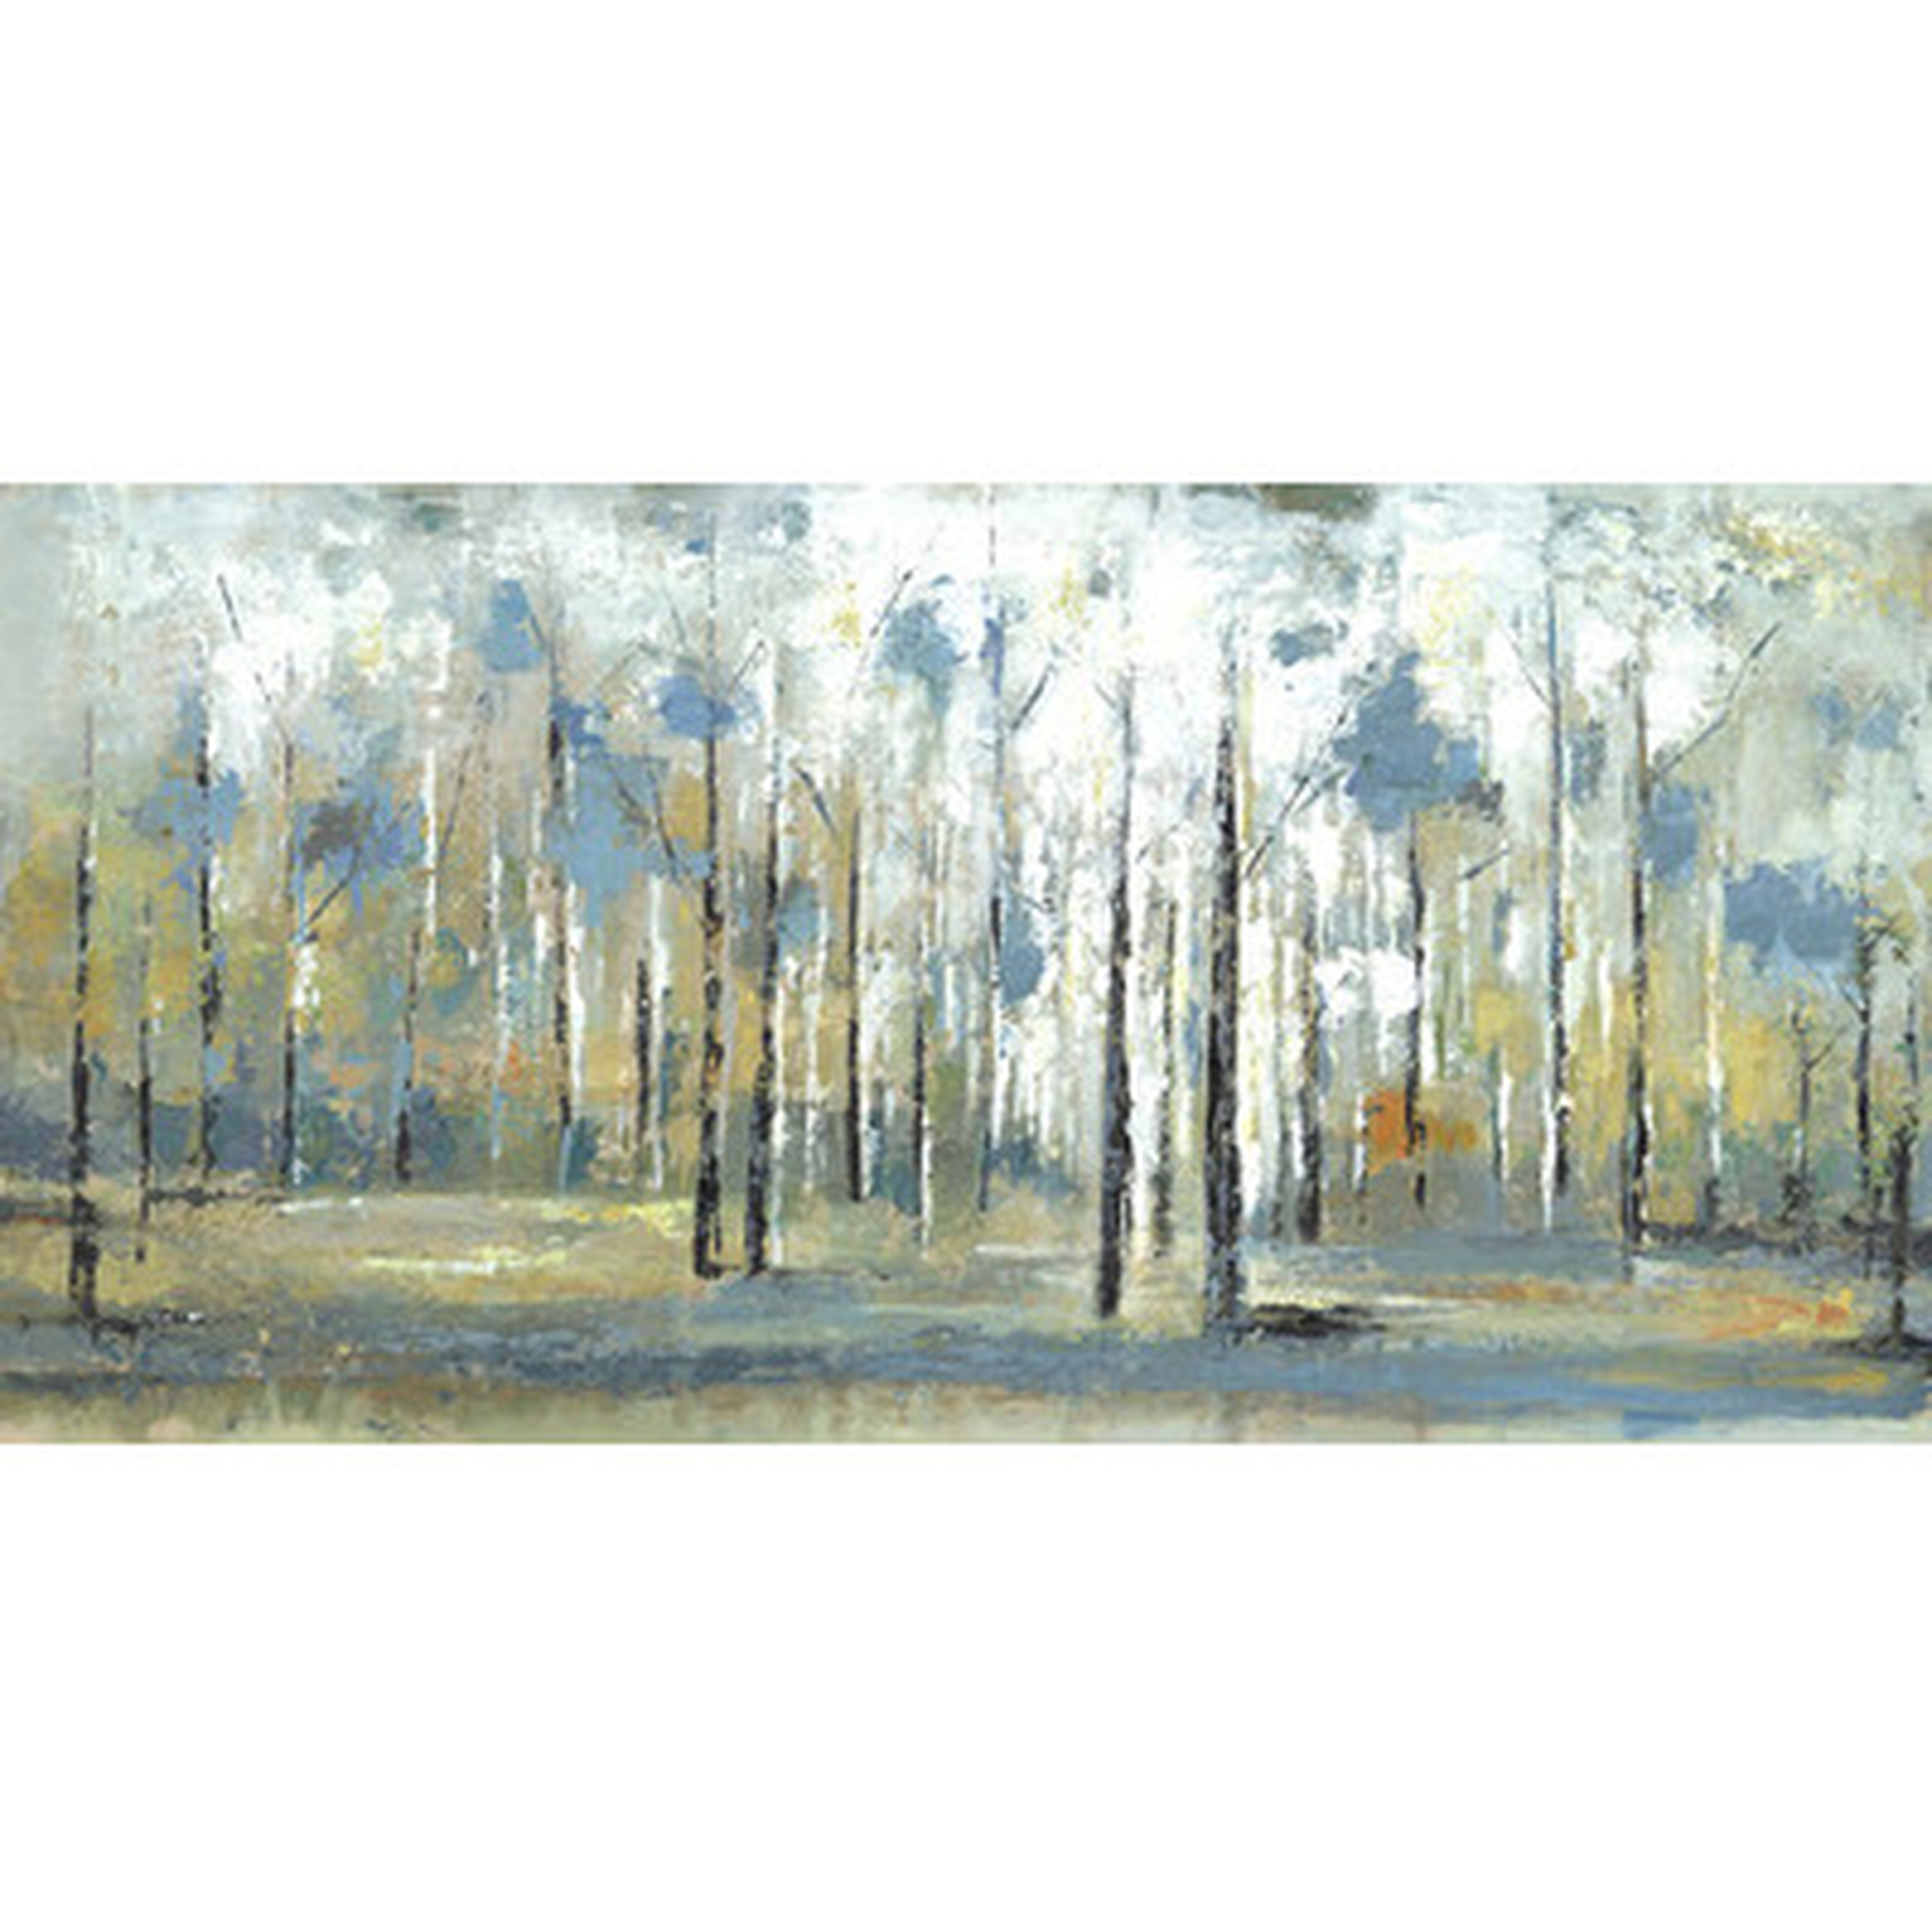 'Sky Branches' by Irina K. Painting Print on Wrapped Canvas - Wayfair